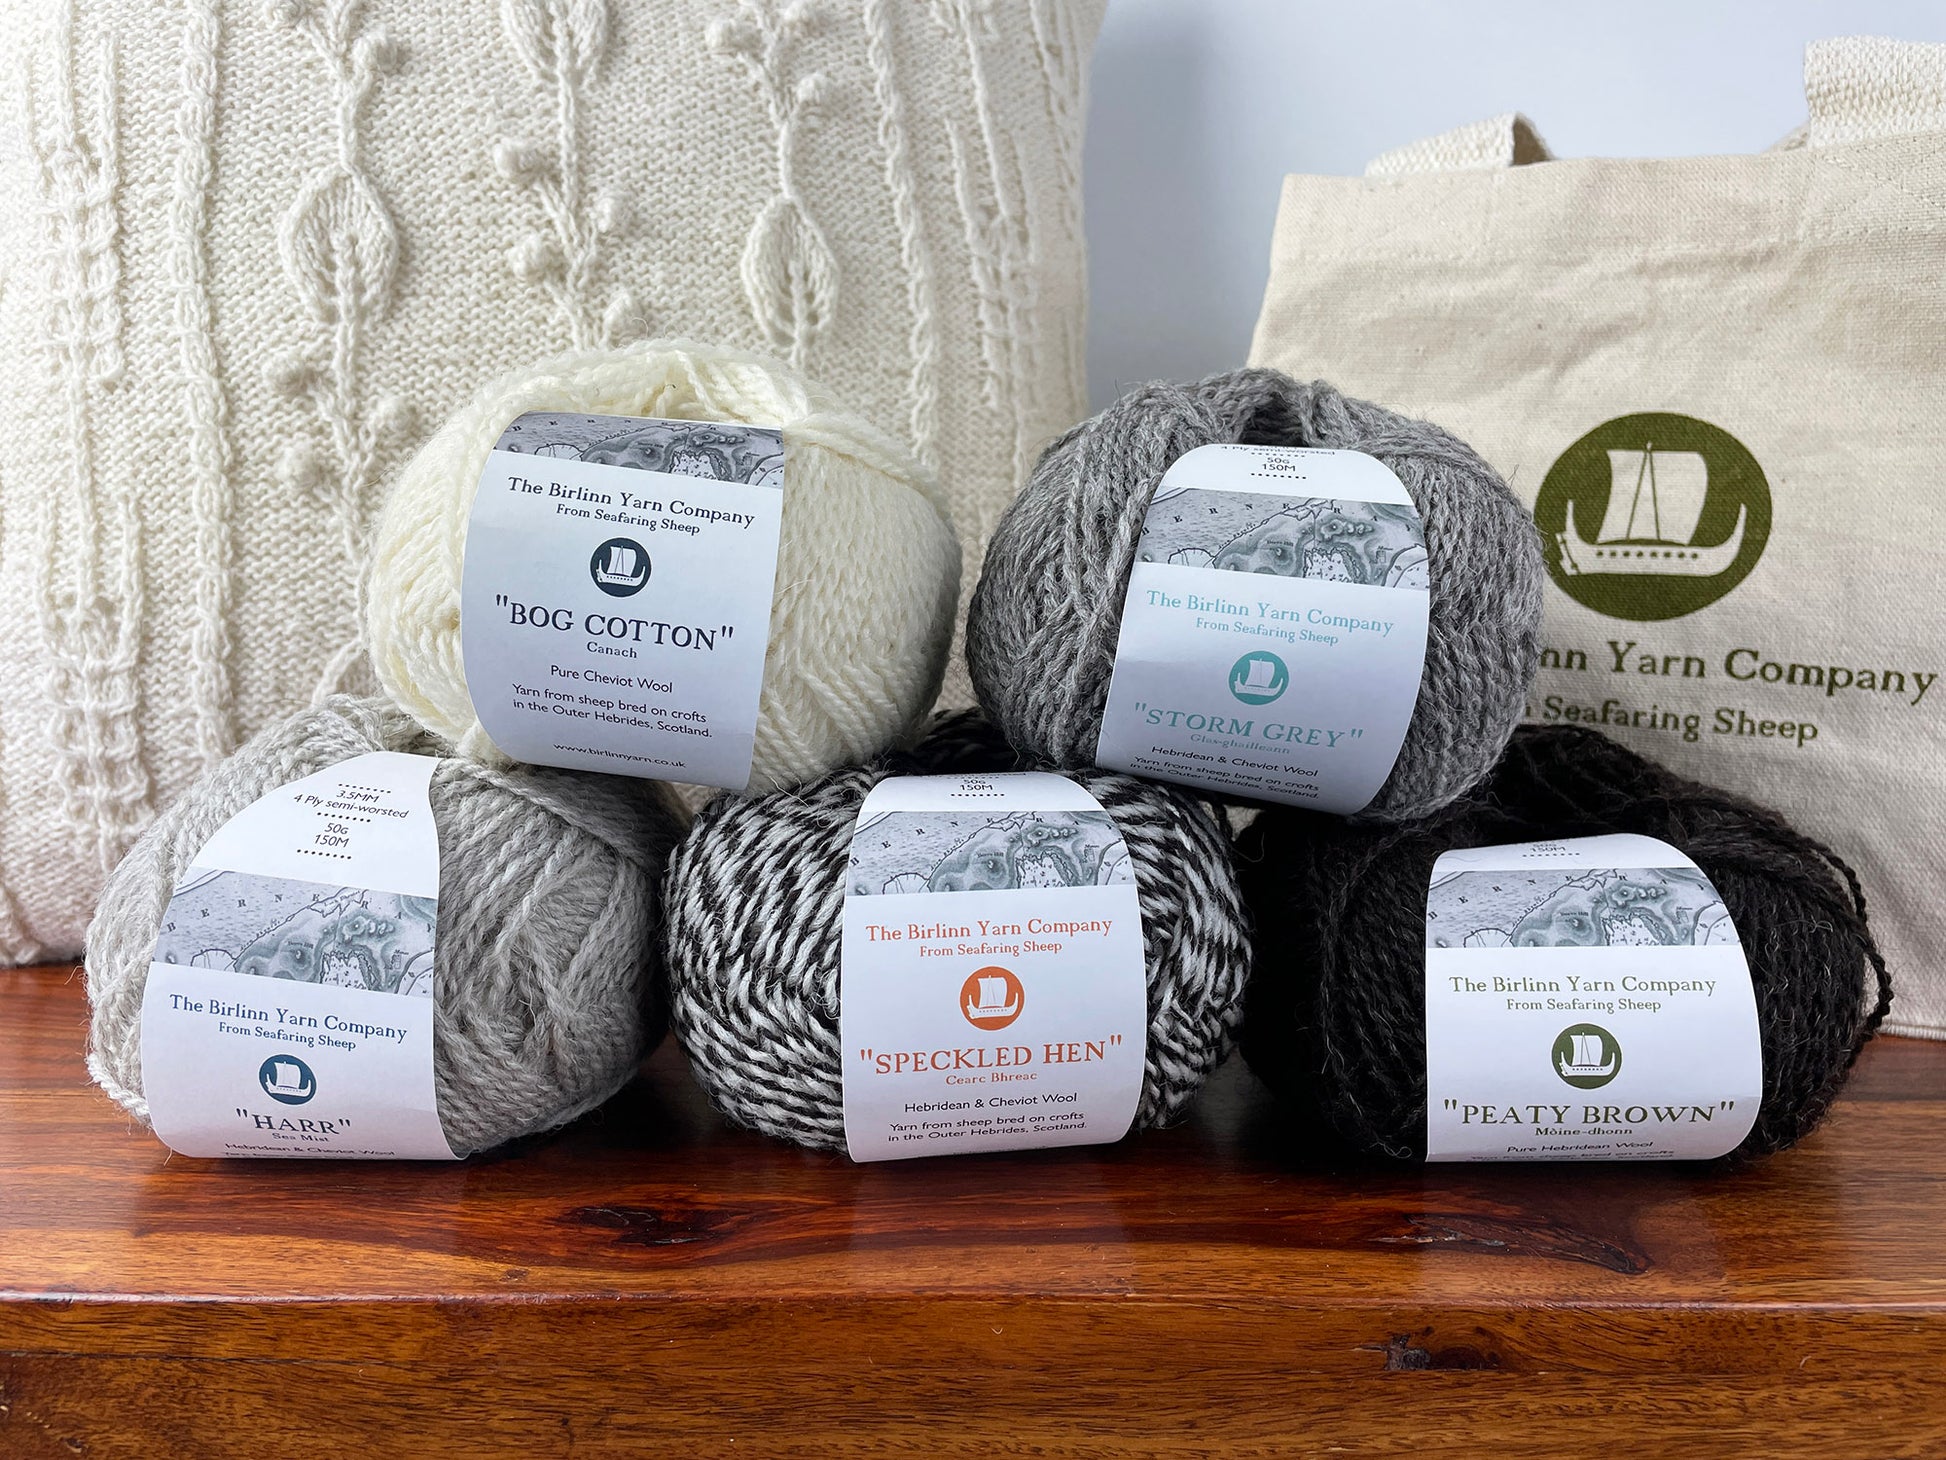 Ball of 4 ply finger weight light grey sea mist colour yarn from Cheviot sheep in North Uist and Hebridean sheep on Berneray. Scottish Textiles Showcase.